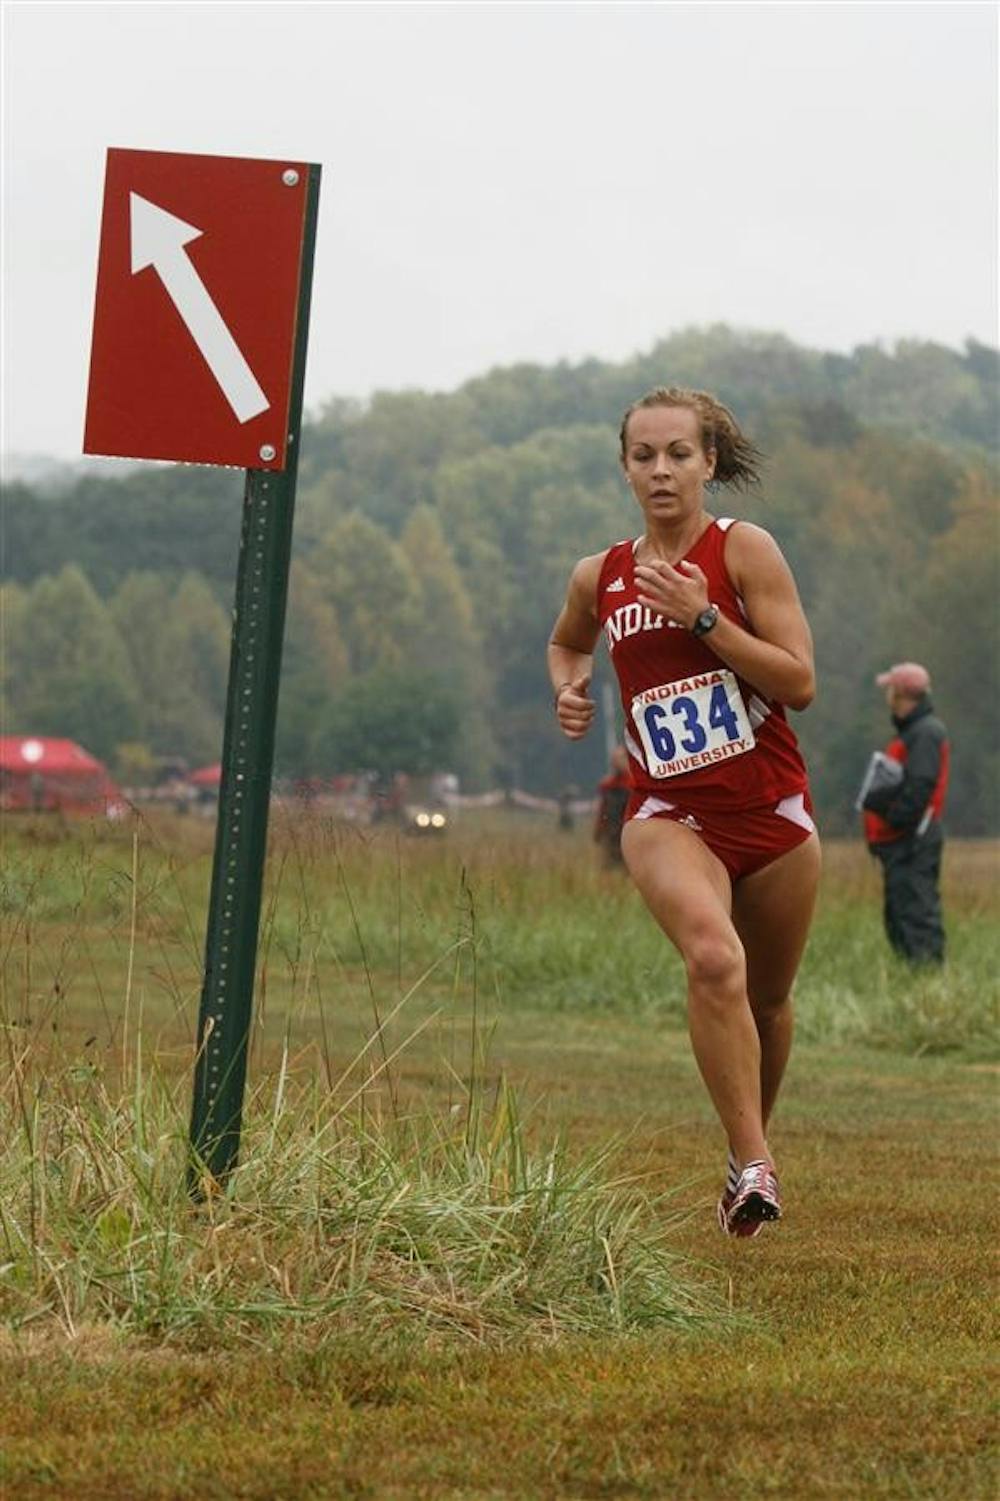 Sophomore Sarah Pease takes a turn Saturday at the Indiana Open at the IU cross country course. Pease finished first in the 5k race with a time of 18:12.86.